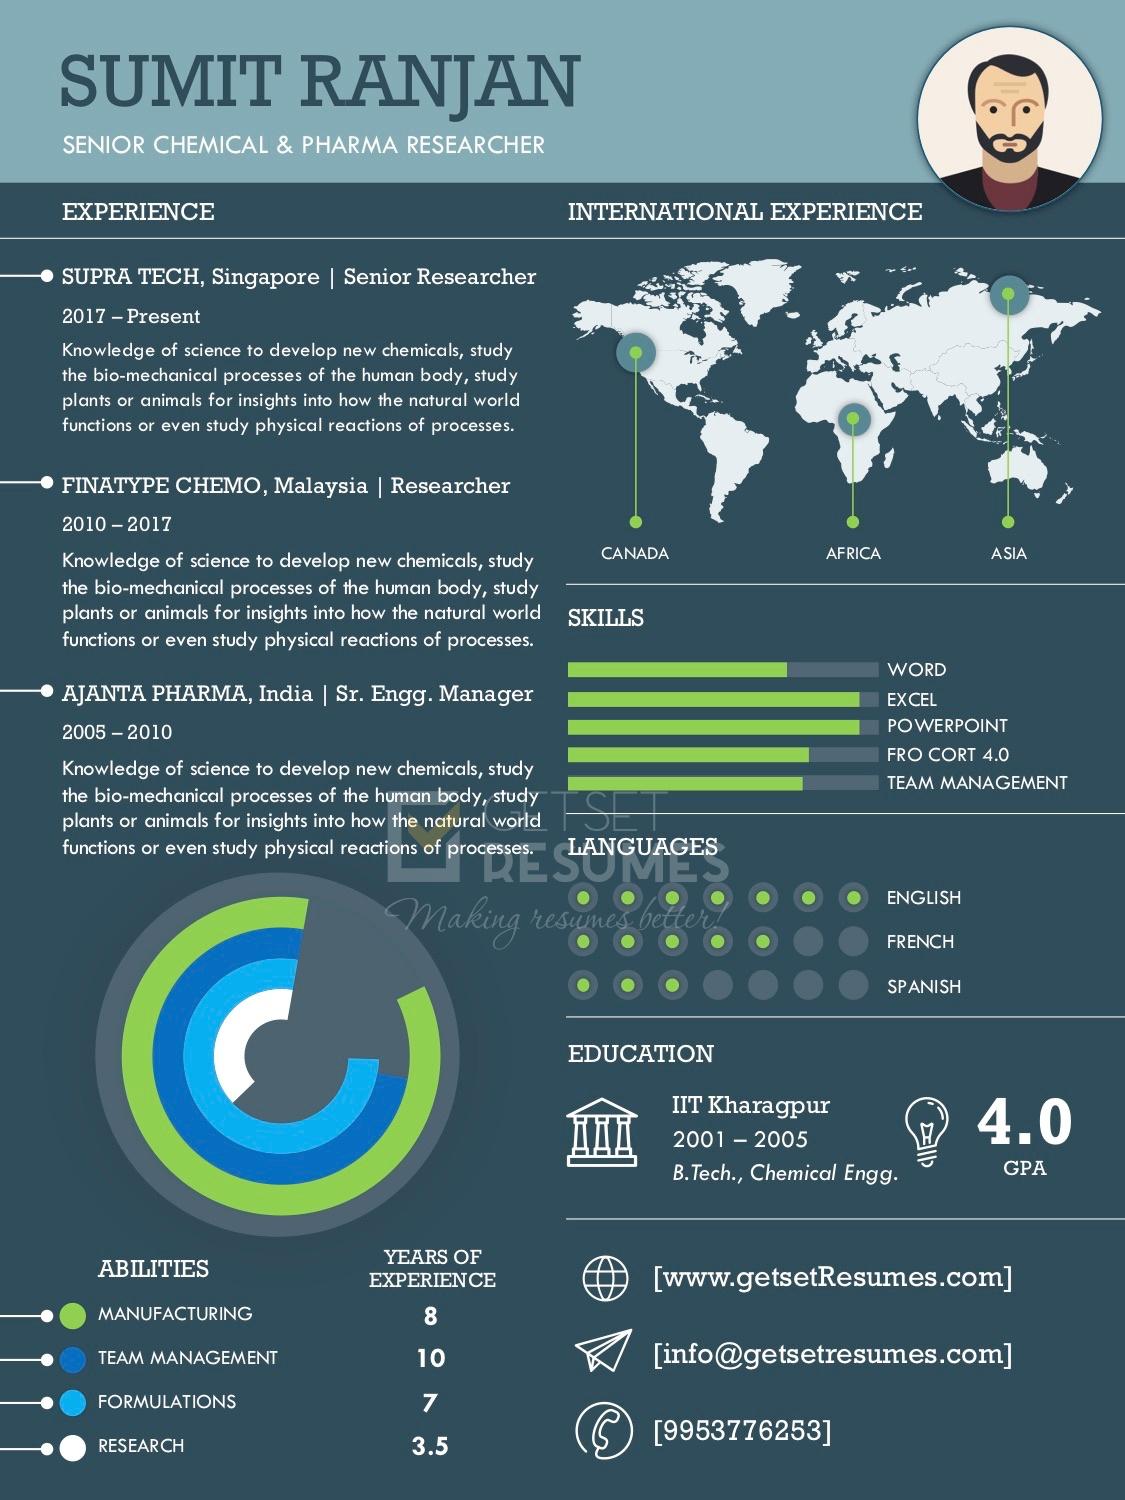 Infographic Resume Sample of Chemical & Pharma Researcher by GetSetResumes